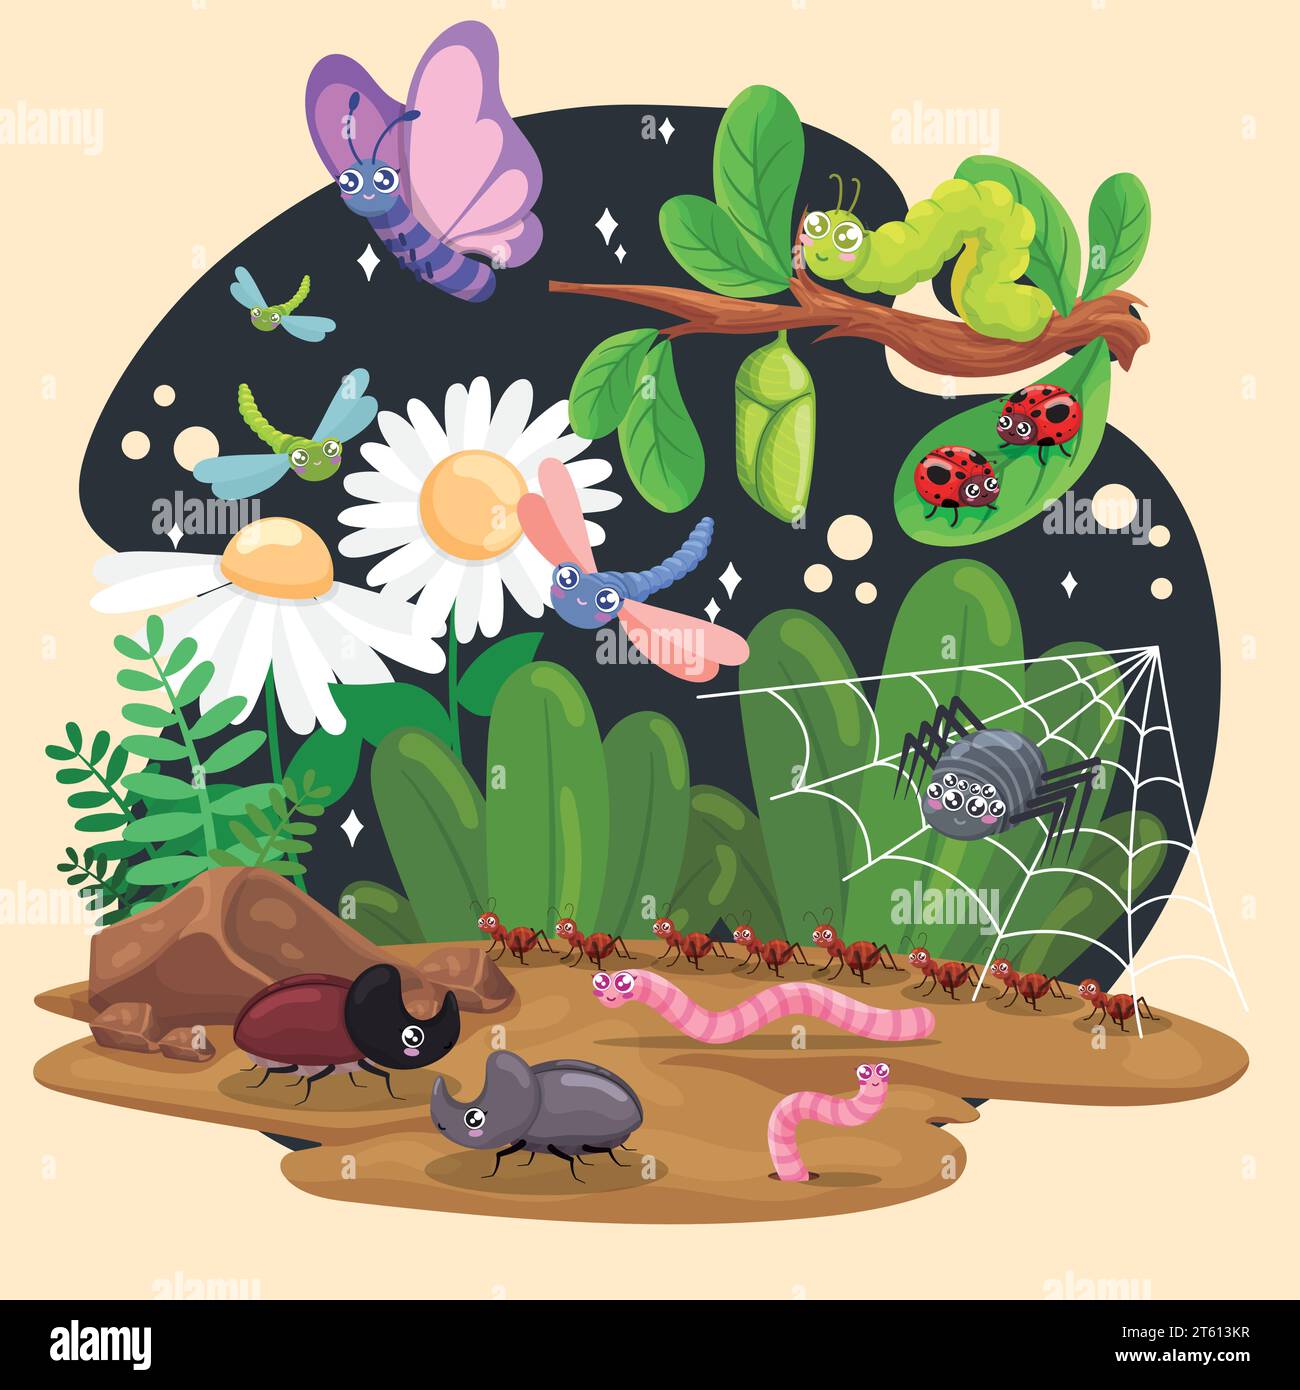 Cute insect characters on a nature environment background Vector Stock Vector